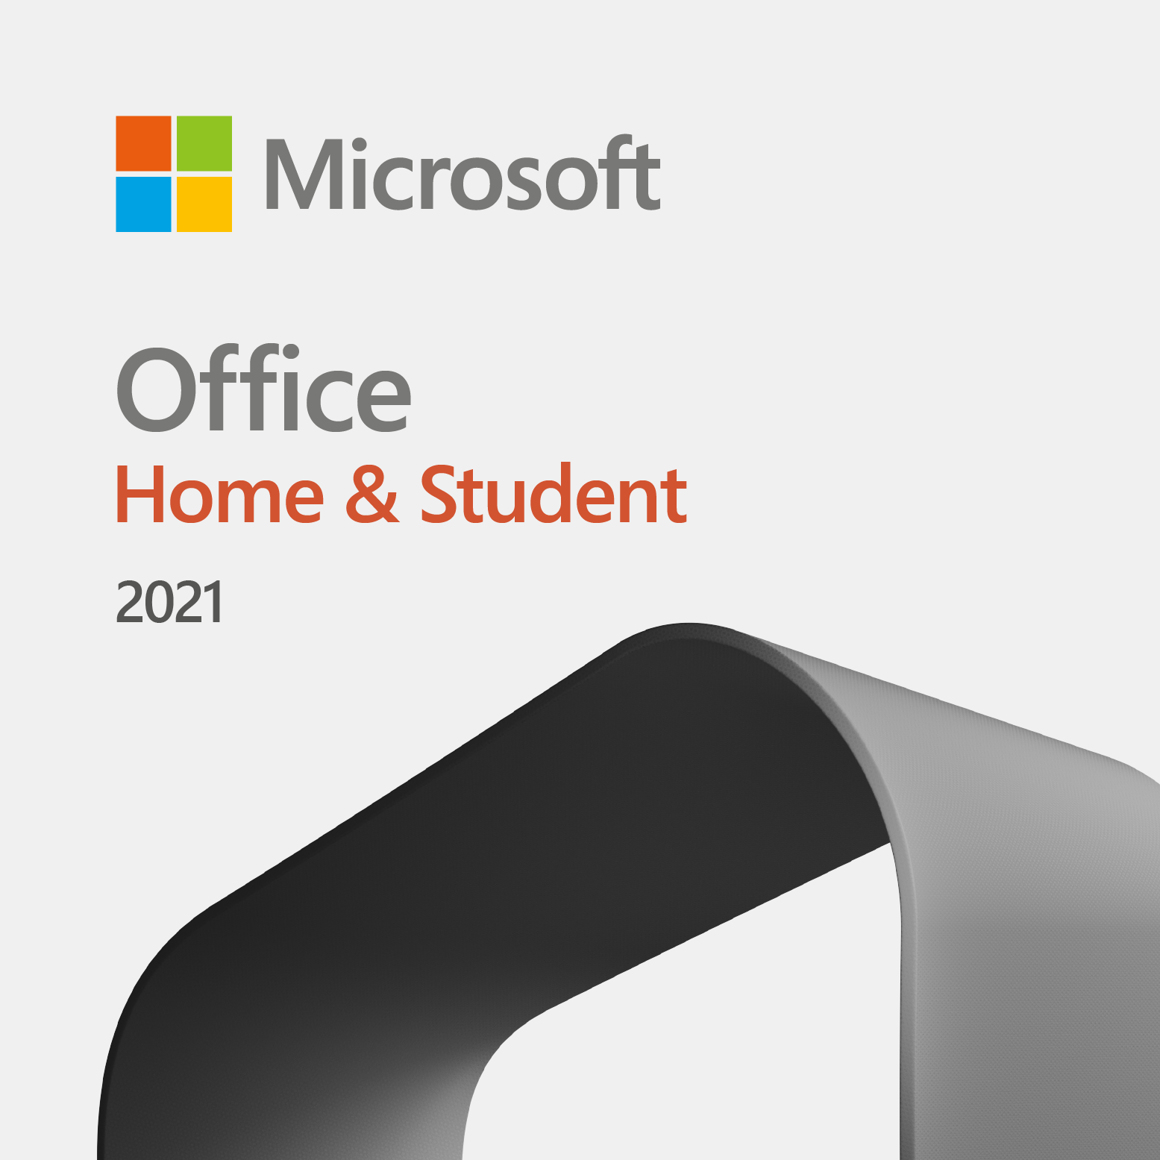 Microsoft Office Home & Student 2021 - Multilingual